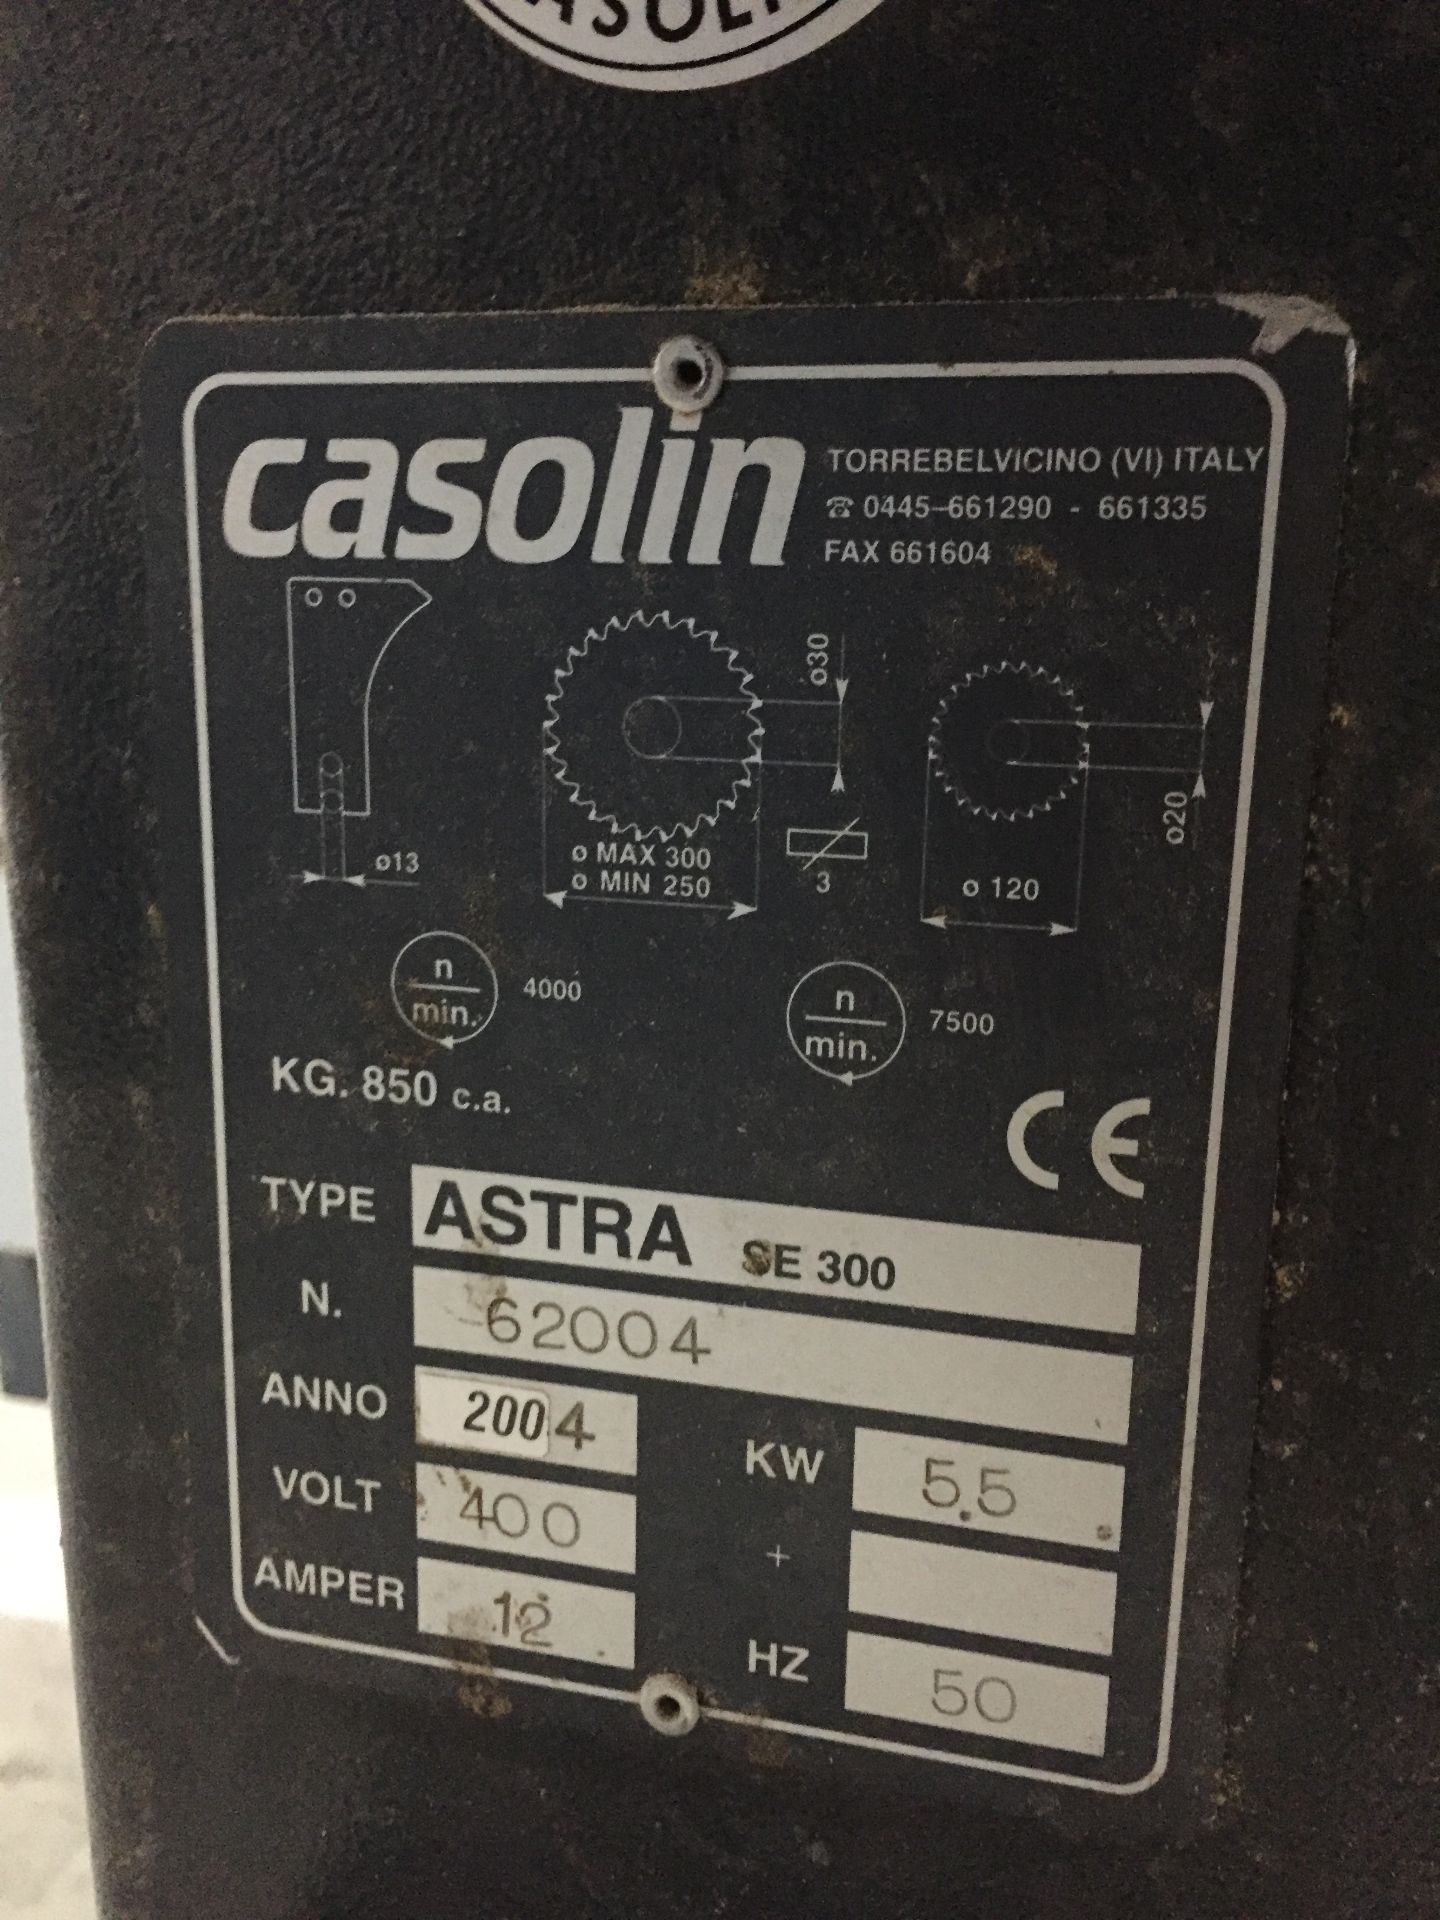 Casolin panel sawModel: Astra SE 300Serial No: 62004YOM: 2004Volt: 400This lot is suitable for the - Image 9 of 9